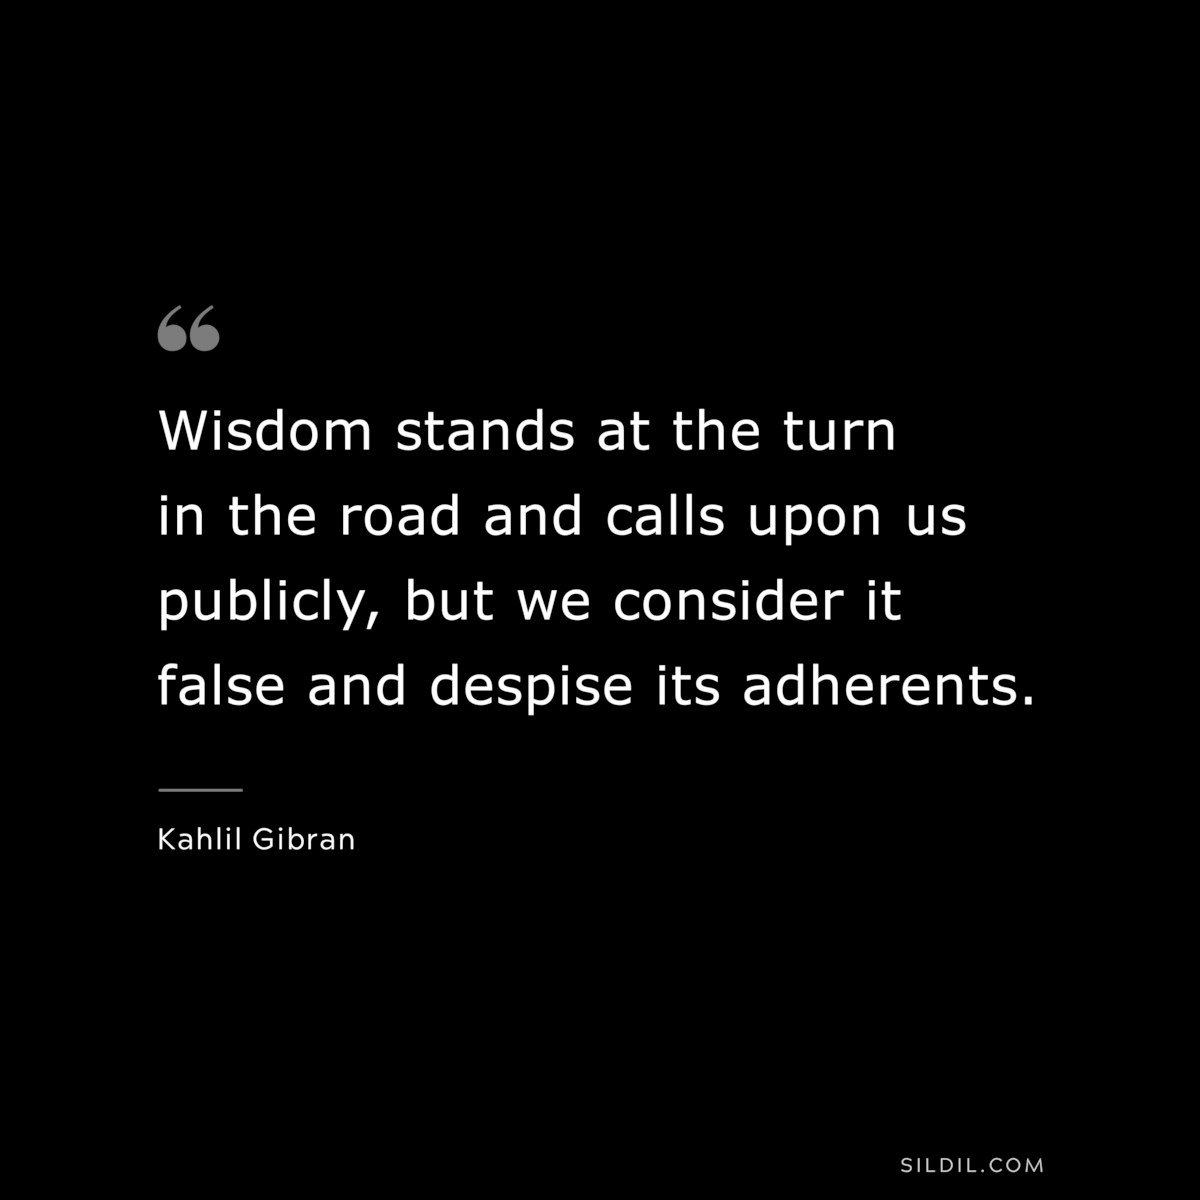 Wisdom stands at the turn in the road and calls upon us publicly, but we consider it false and despise its adherents. ― Kahlil Gibran